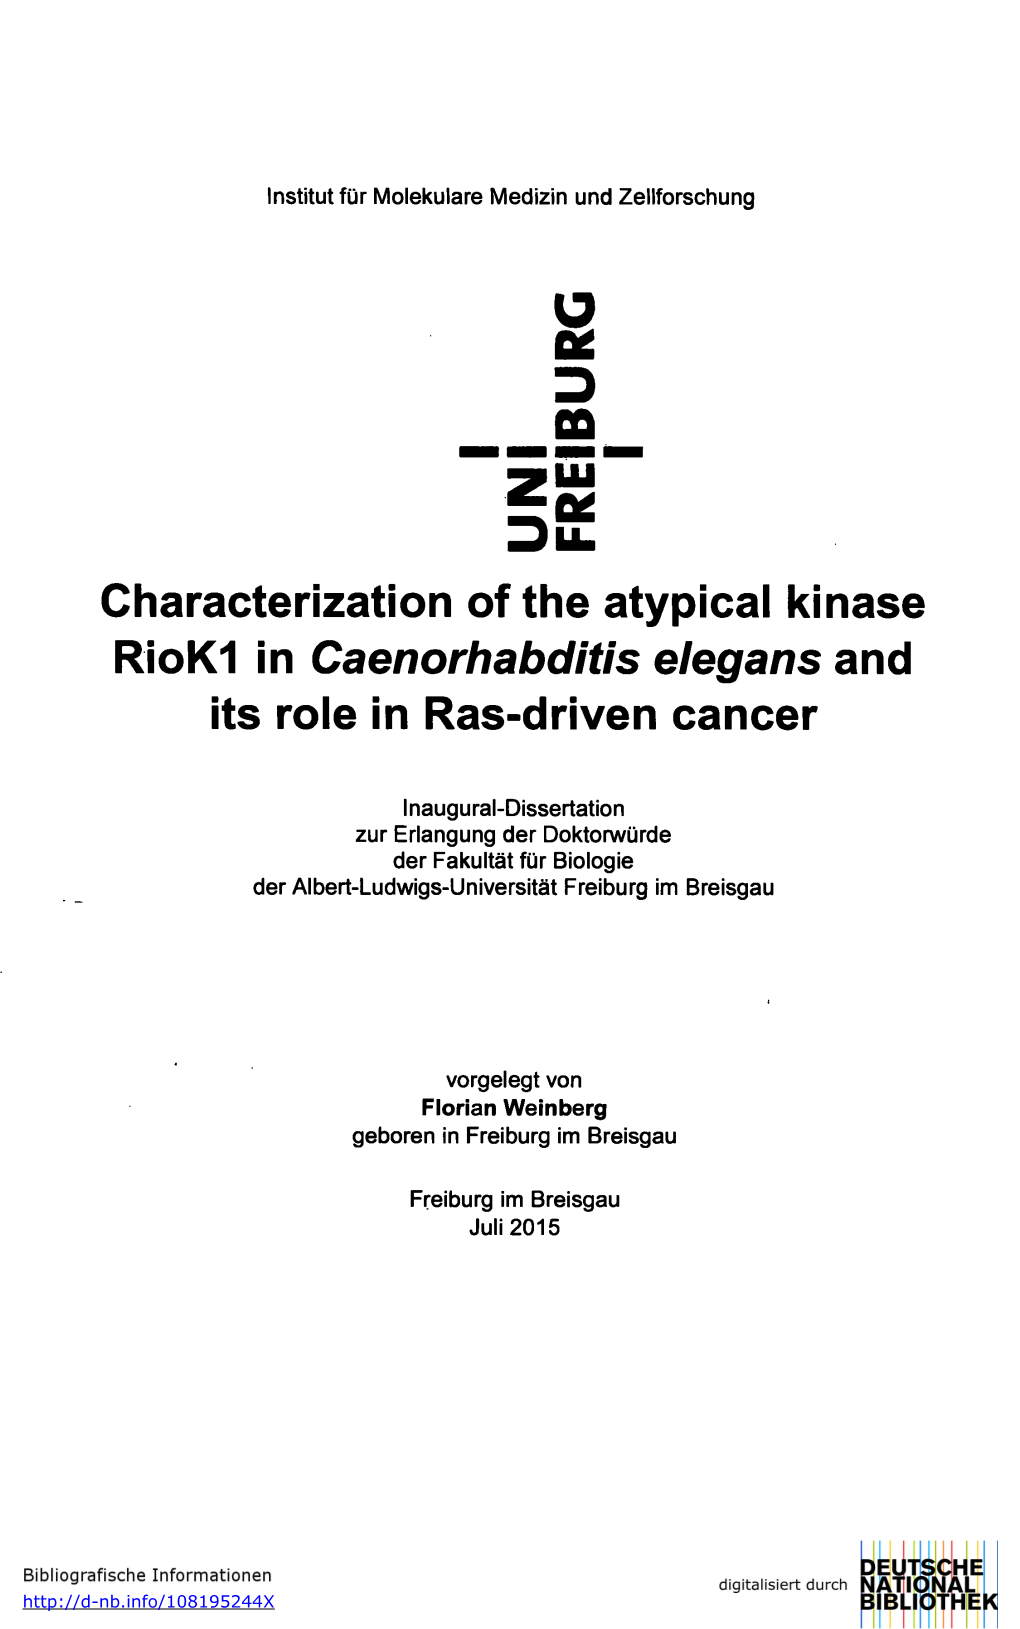 O Characterization of the Atypical Kinase Riok1 in Caenorhabditis